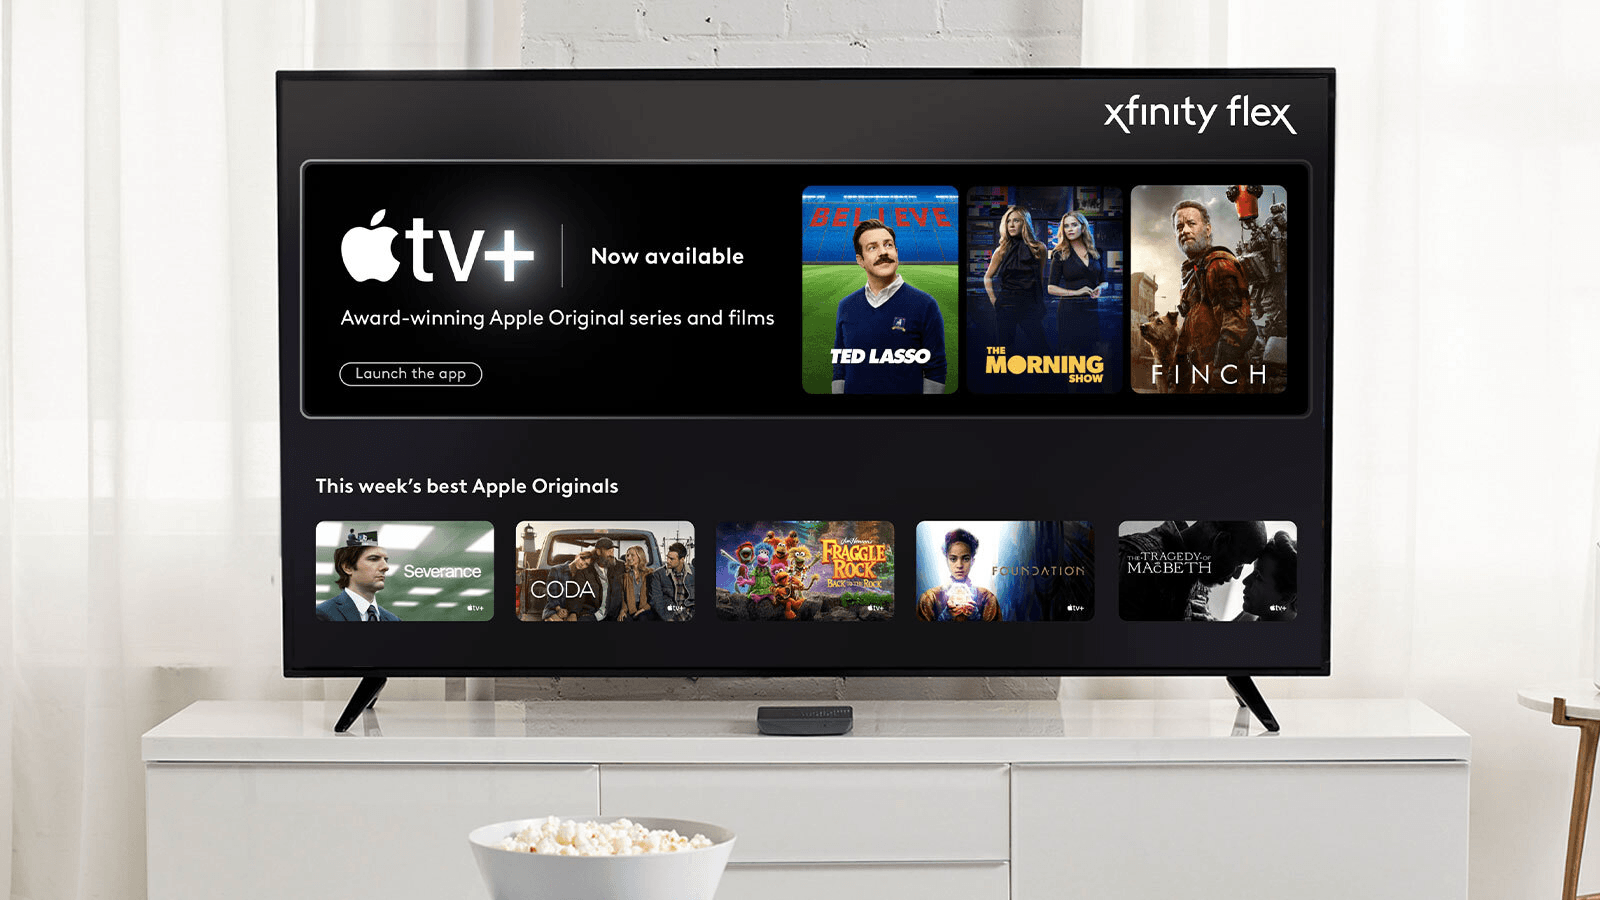 Apple TV+ is Now Available on Comcast Platforms with 3 Month Free Trial Offer